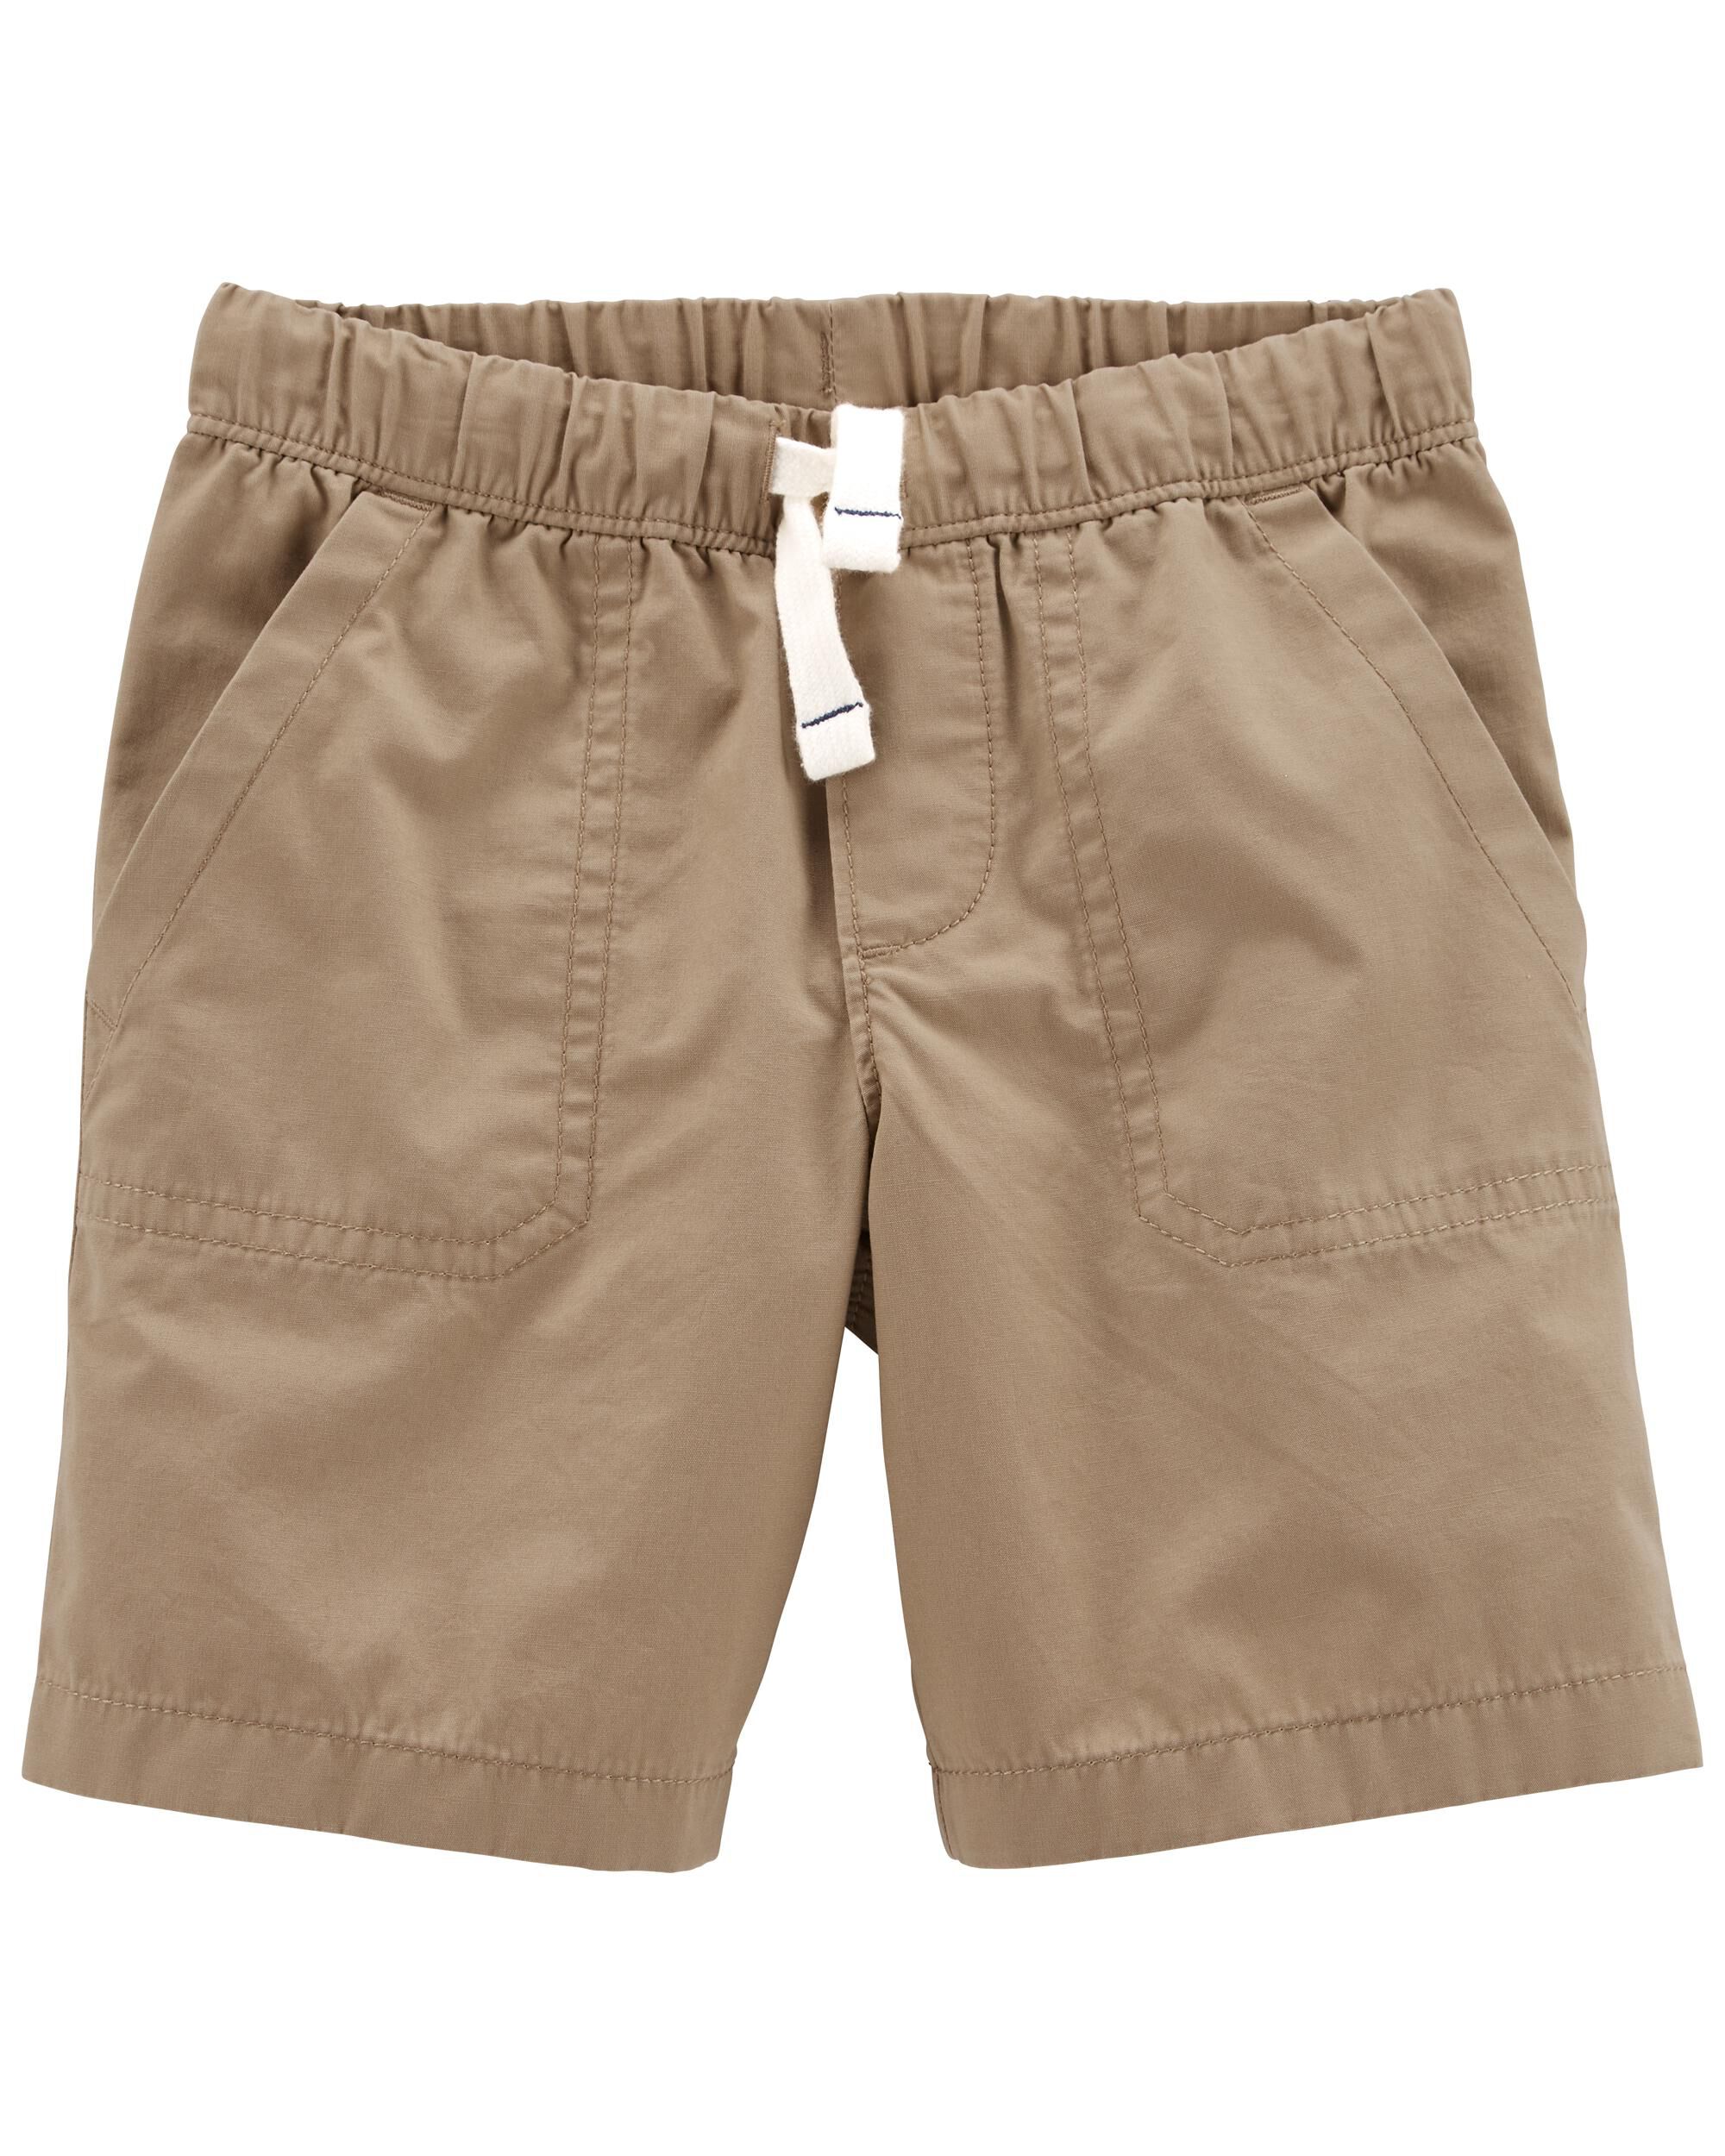 Simple Joys by Carters Toddler Boys 3-Pack Mesh Shorts